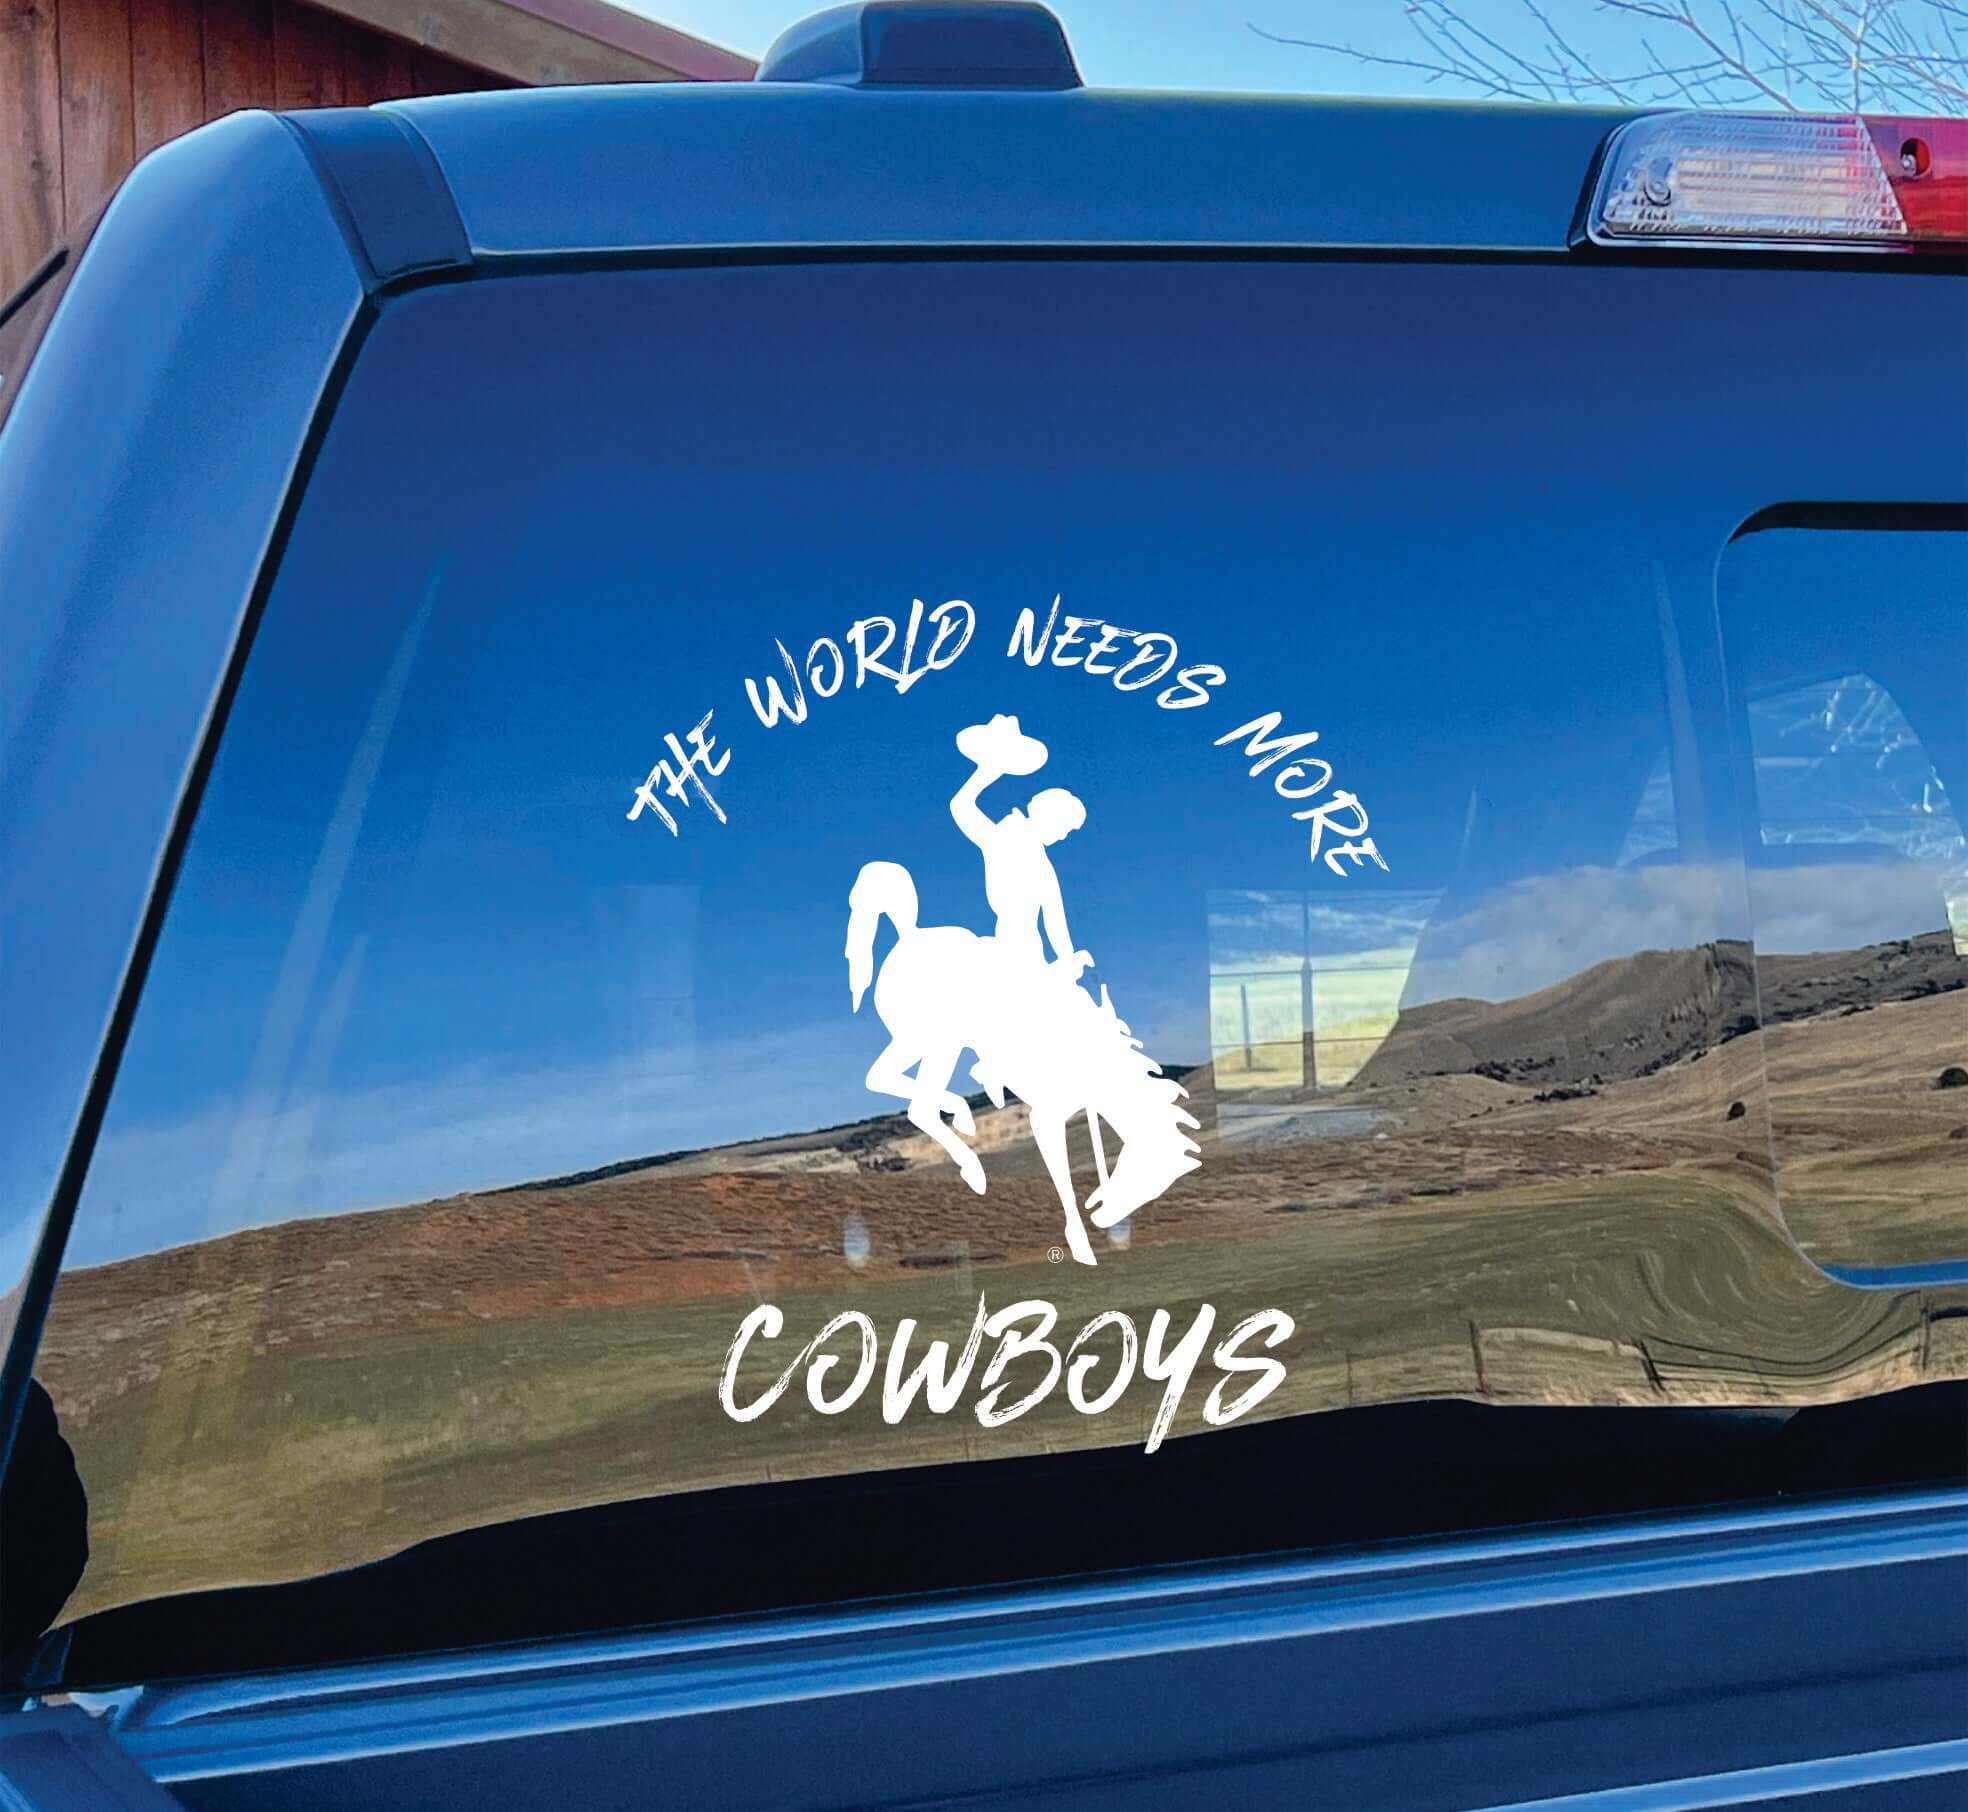 Alternate view of white vinyl decal "World Needs More Cowboys" on car window